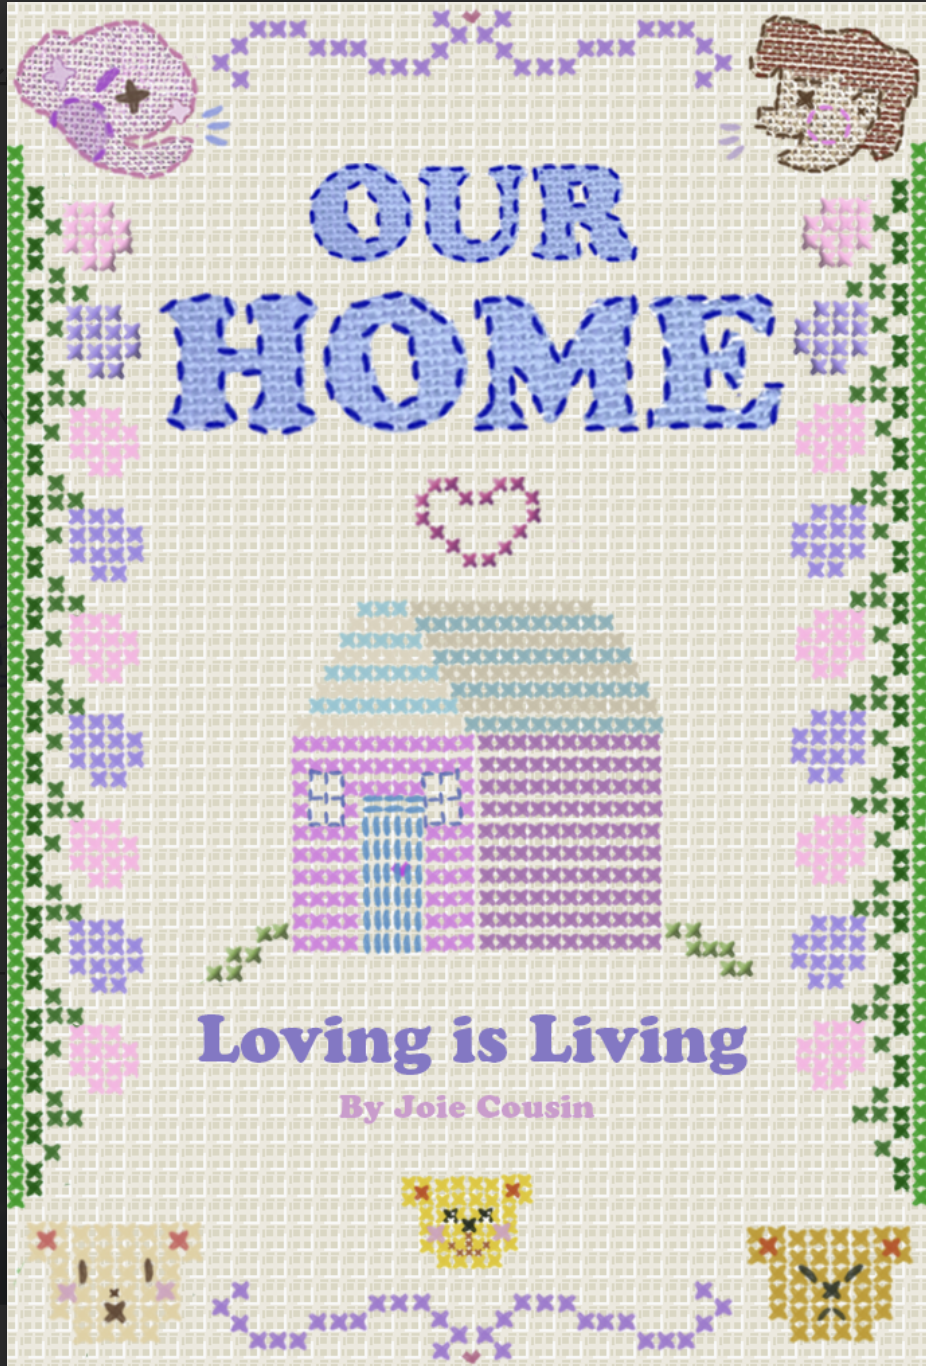 A cross stitched picture of a house